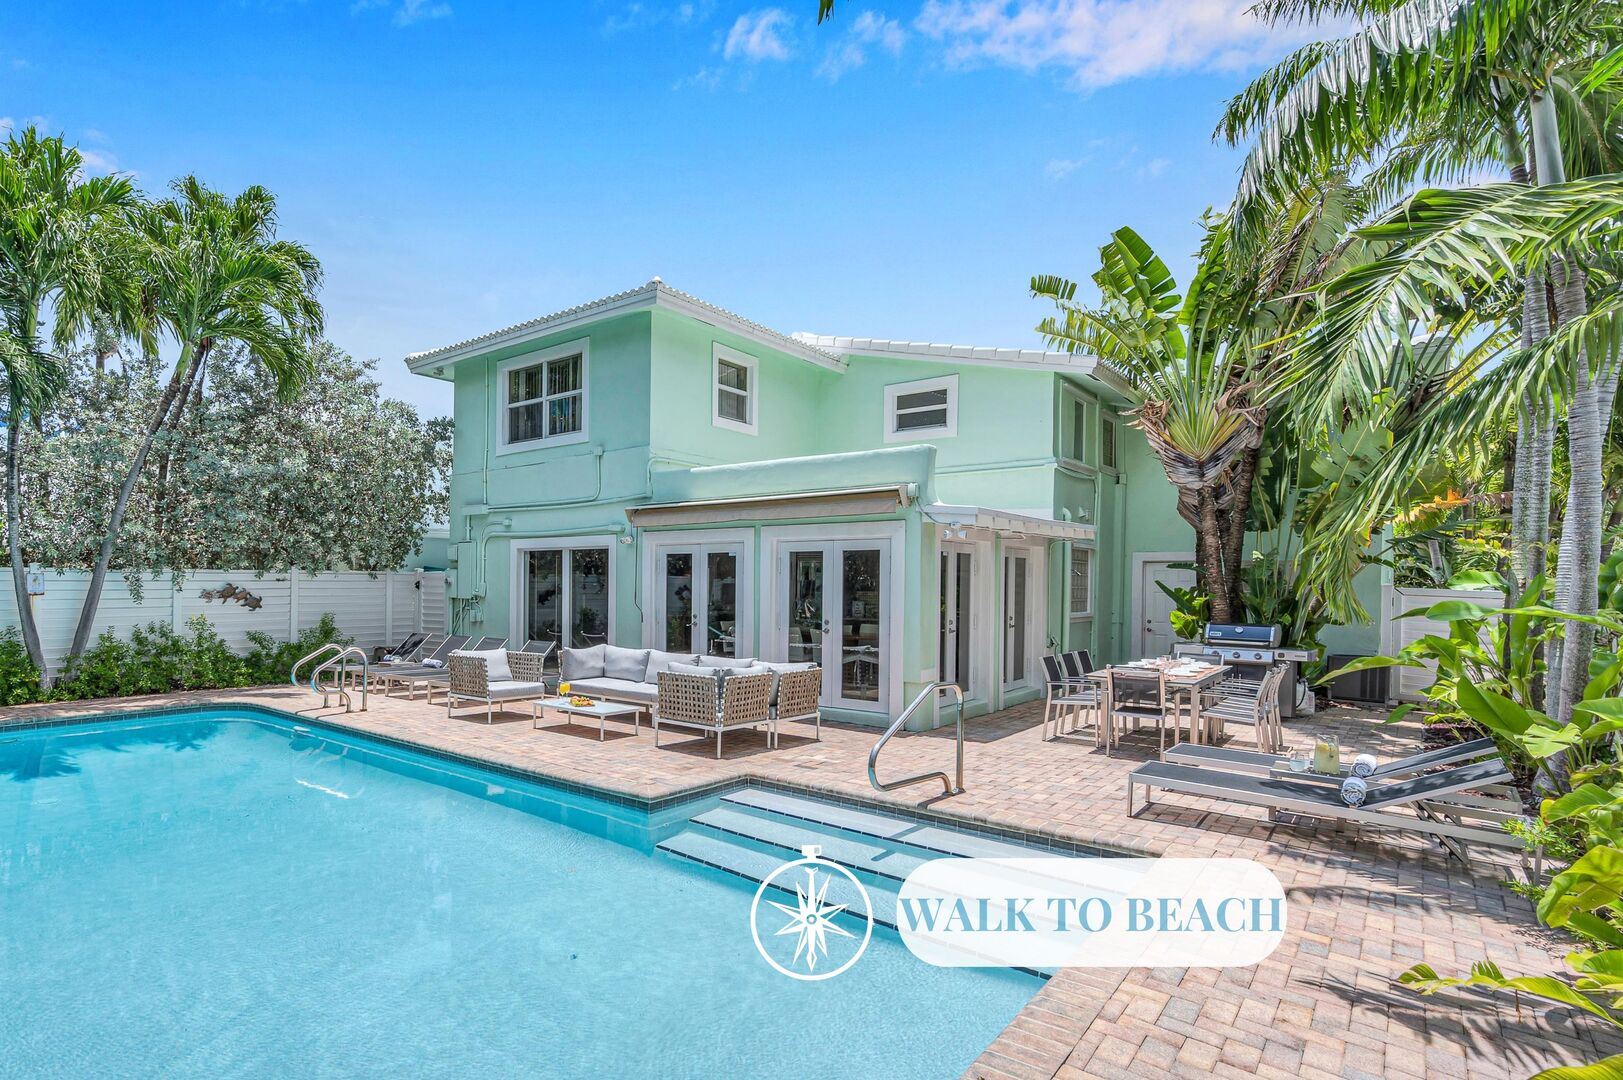 Steps away from the beach.  Classic coastal Florida residence with a heated pool.